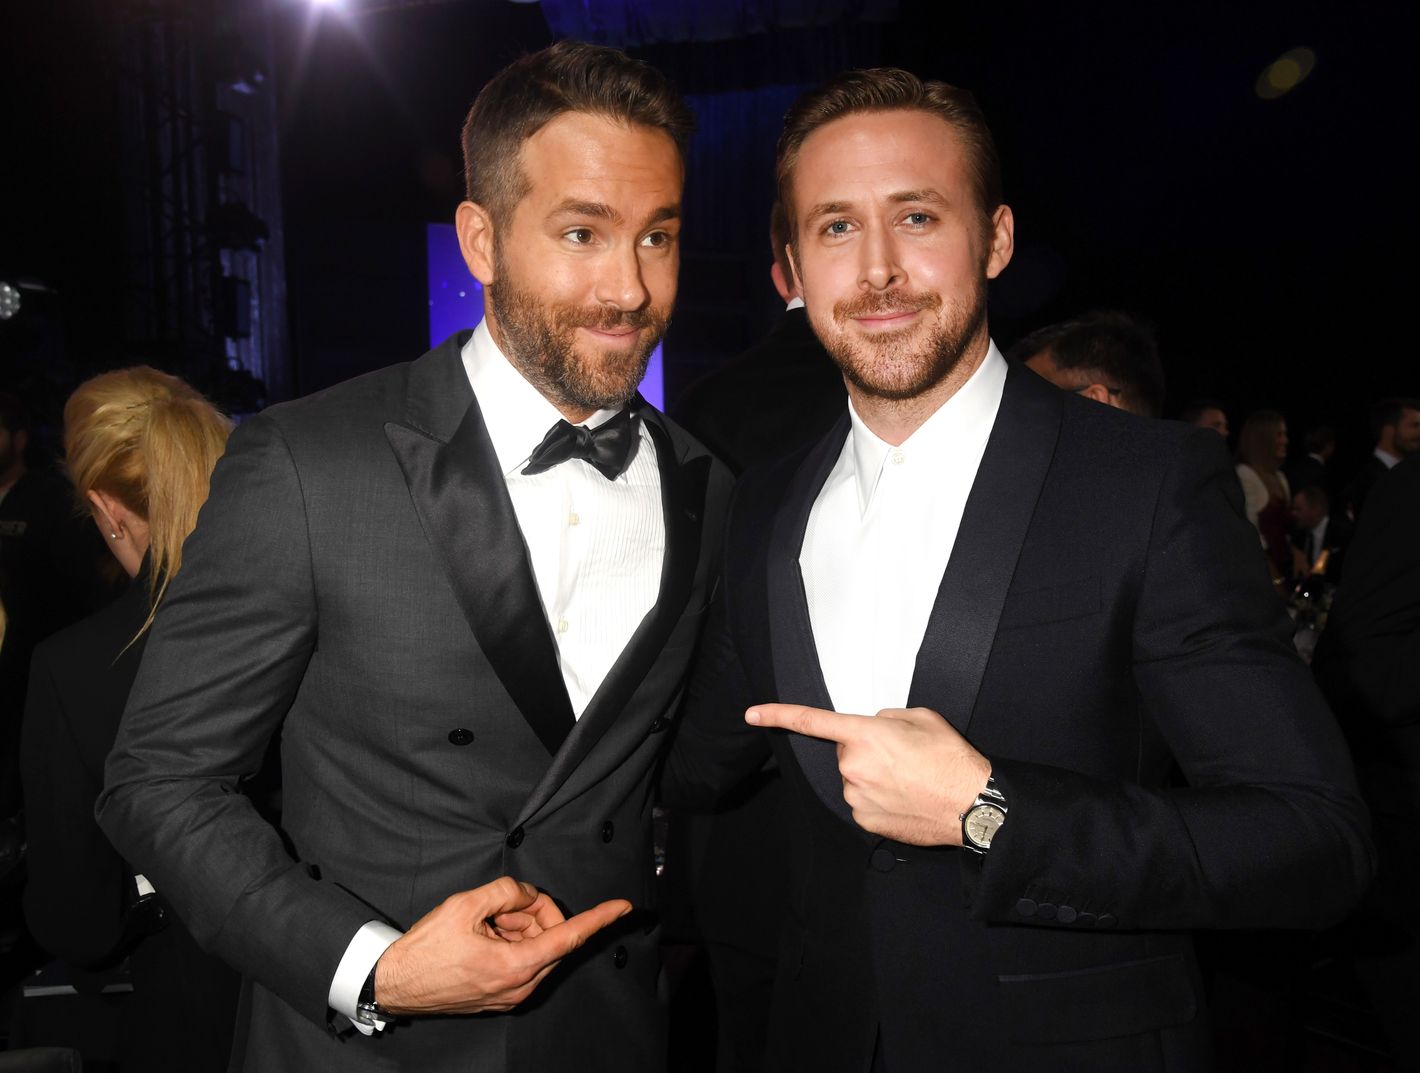 Several Photos of Ryan Gosling and Ryan Reynolds Pointing at Each Other.